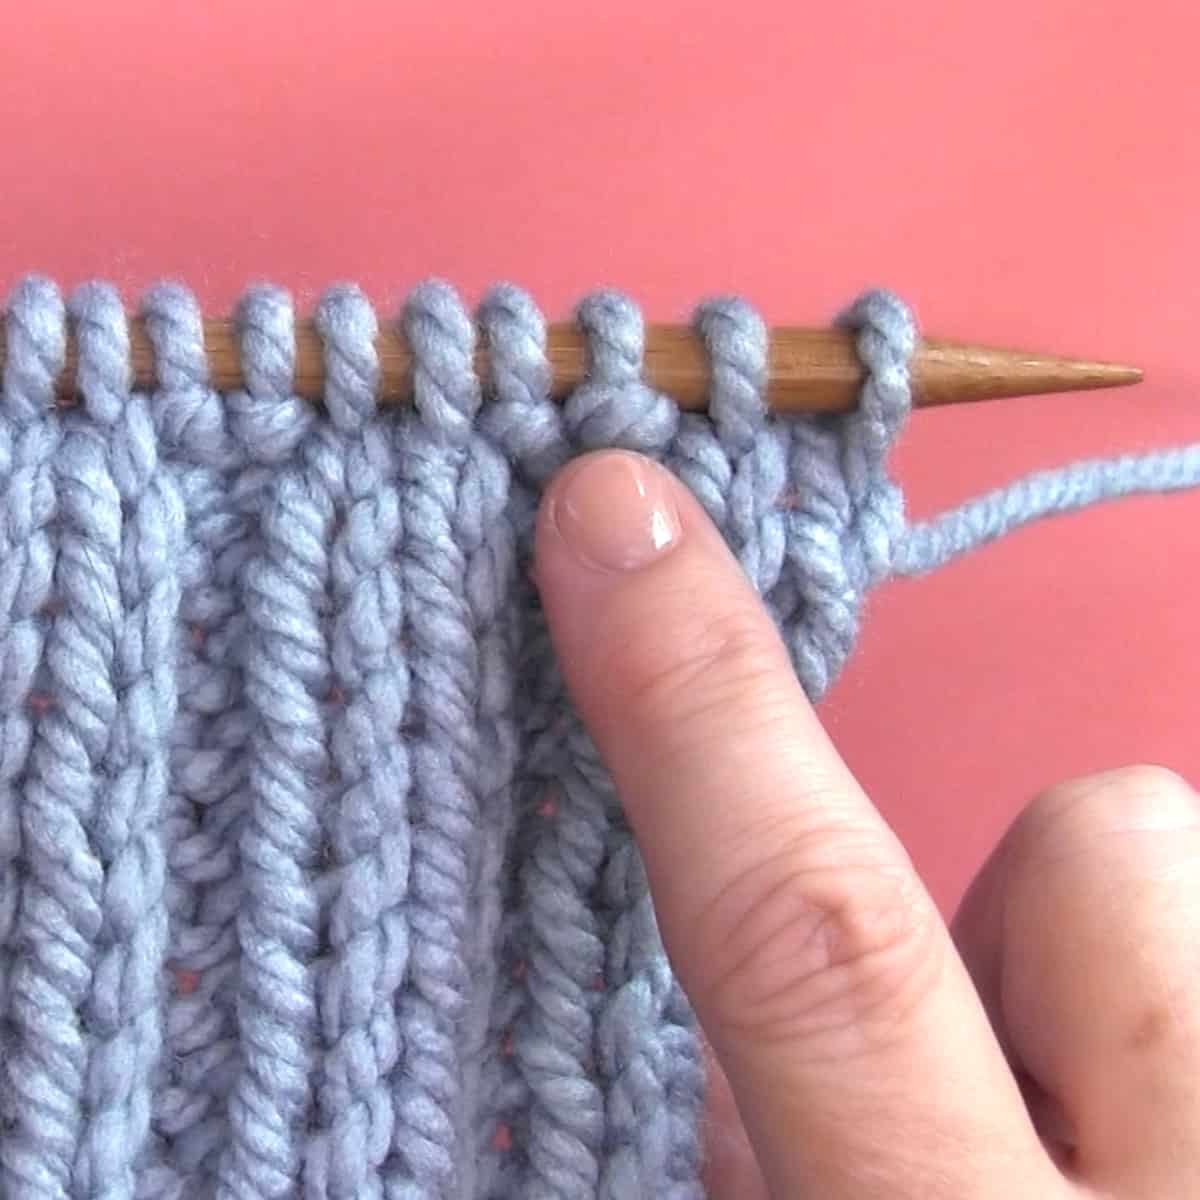 Finger pointing out a purl stitch on a knitting needle with yarn.